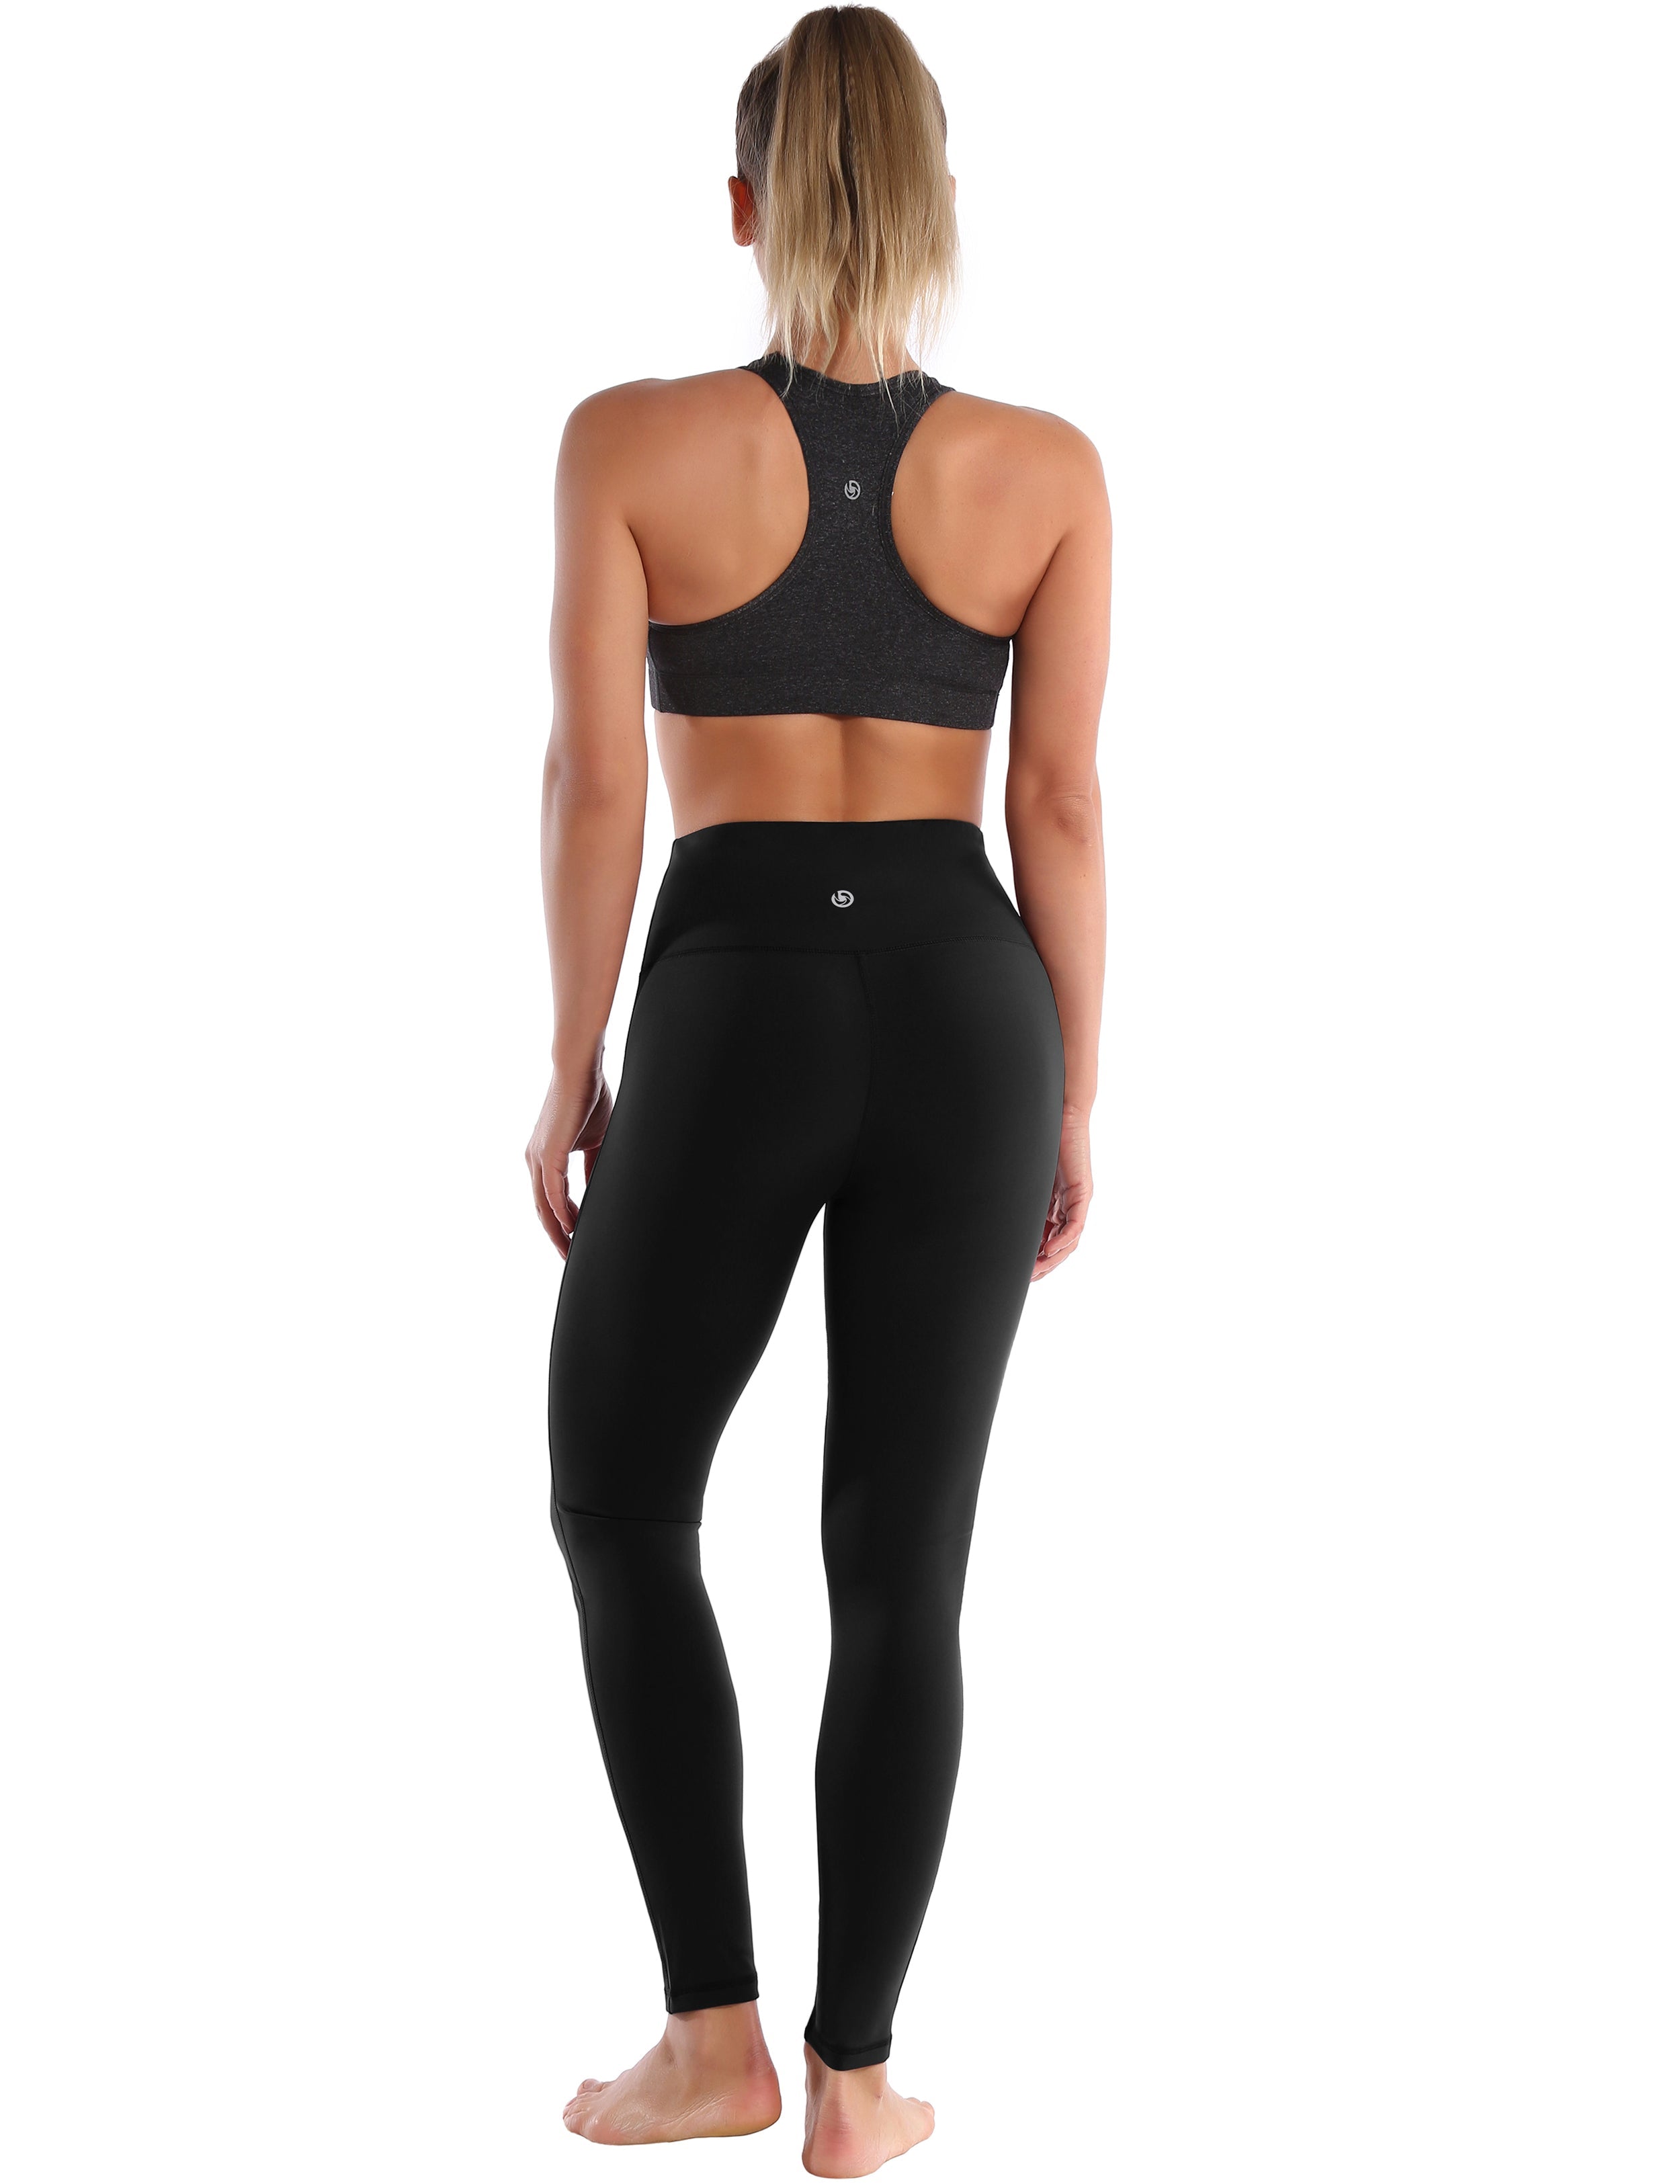 High Waist Side Line Pilates Pants black Side Line is Make Your Legs Look Longer and Thinner 75%Nylon/25%Spandex Fabric doesn't attract lint easily 4-way stretch No see-through Moisture-wicking Tummy control Inner pocket Two lengths